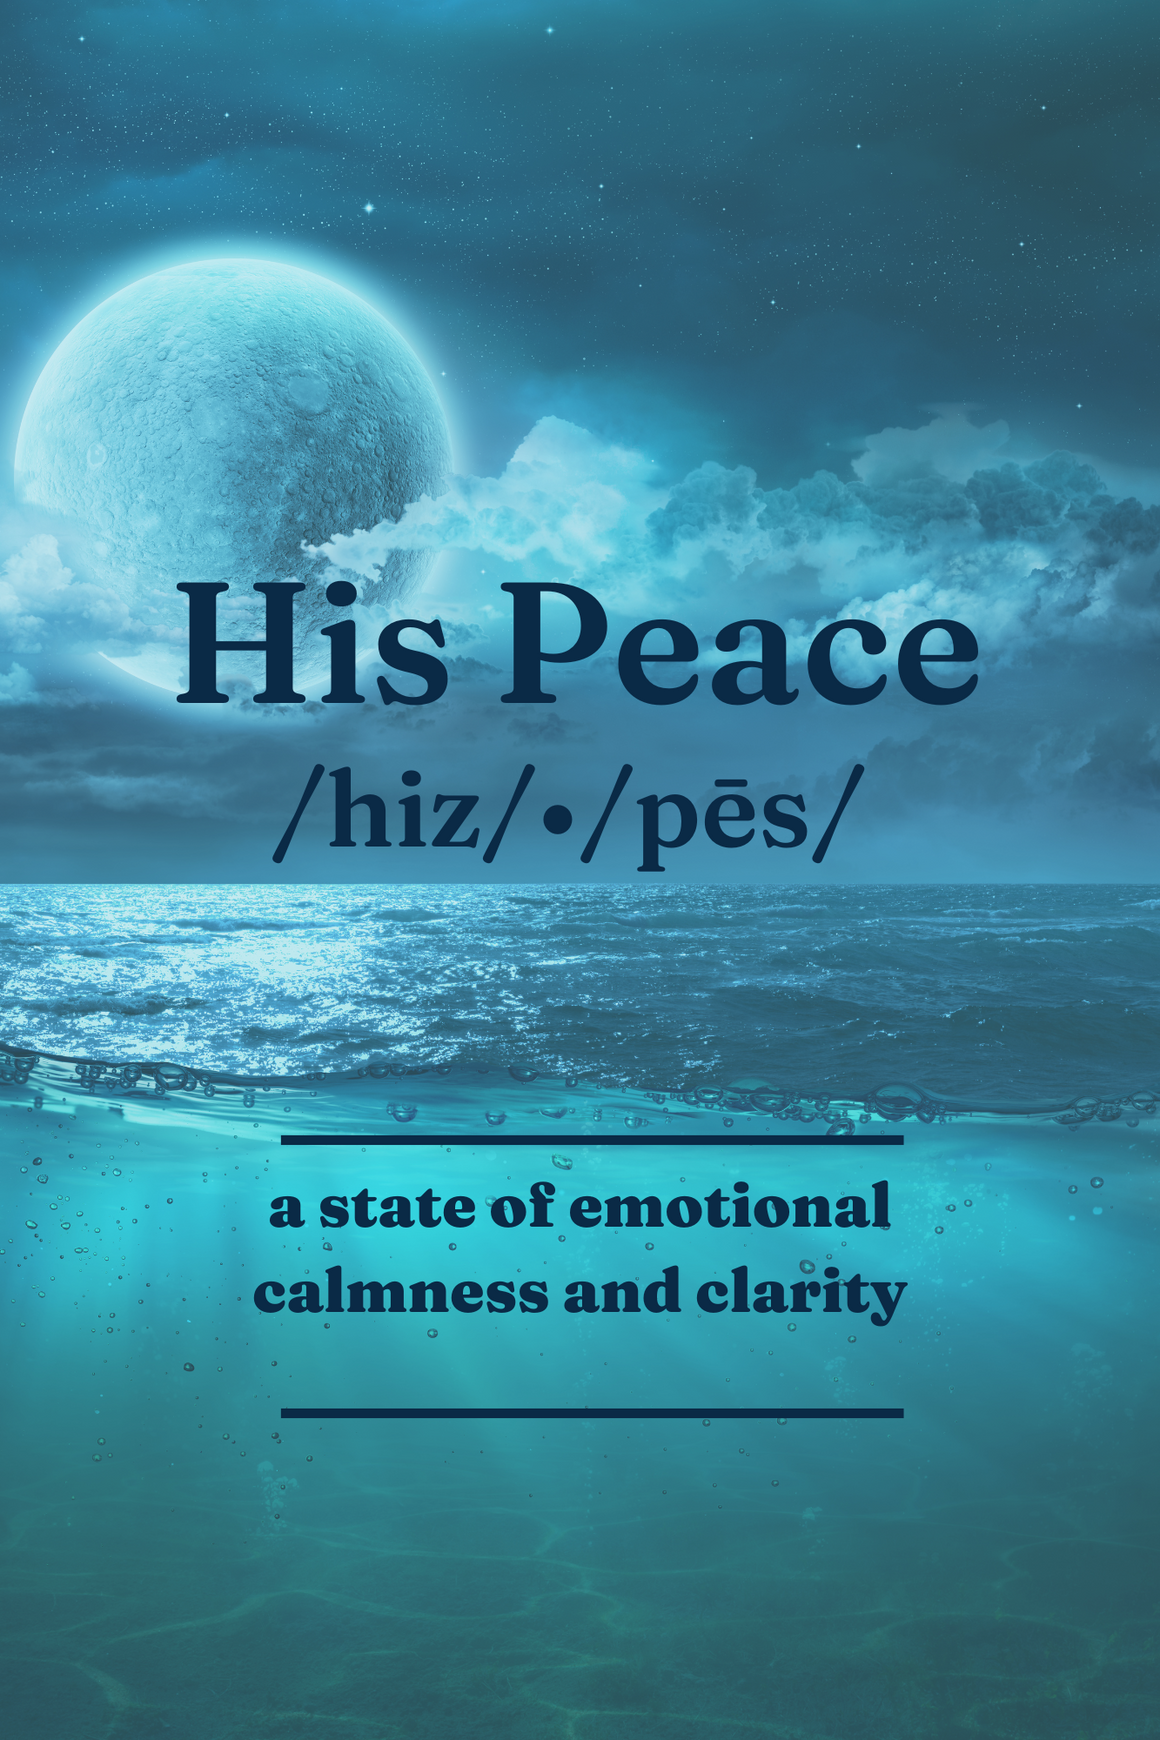 His Peace: a state of emotional calmness and clarity